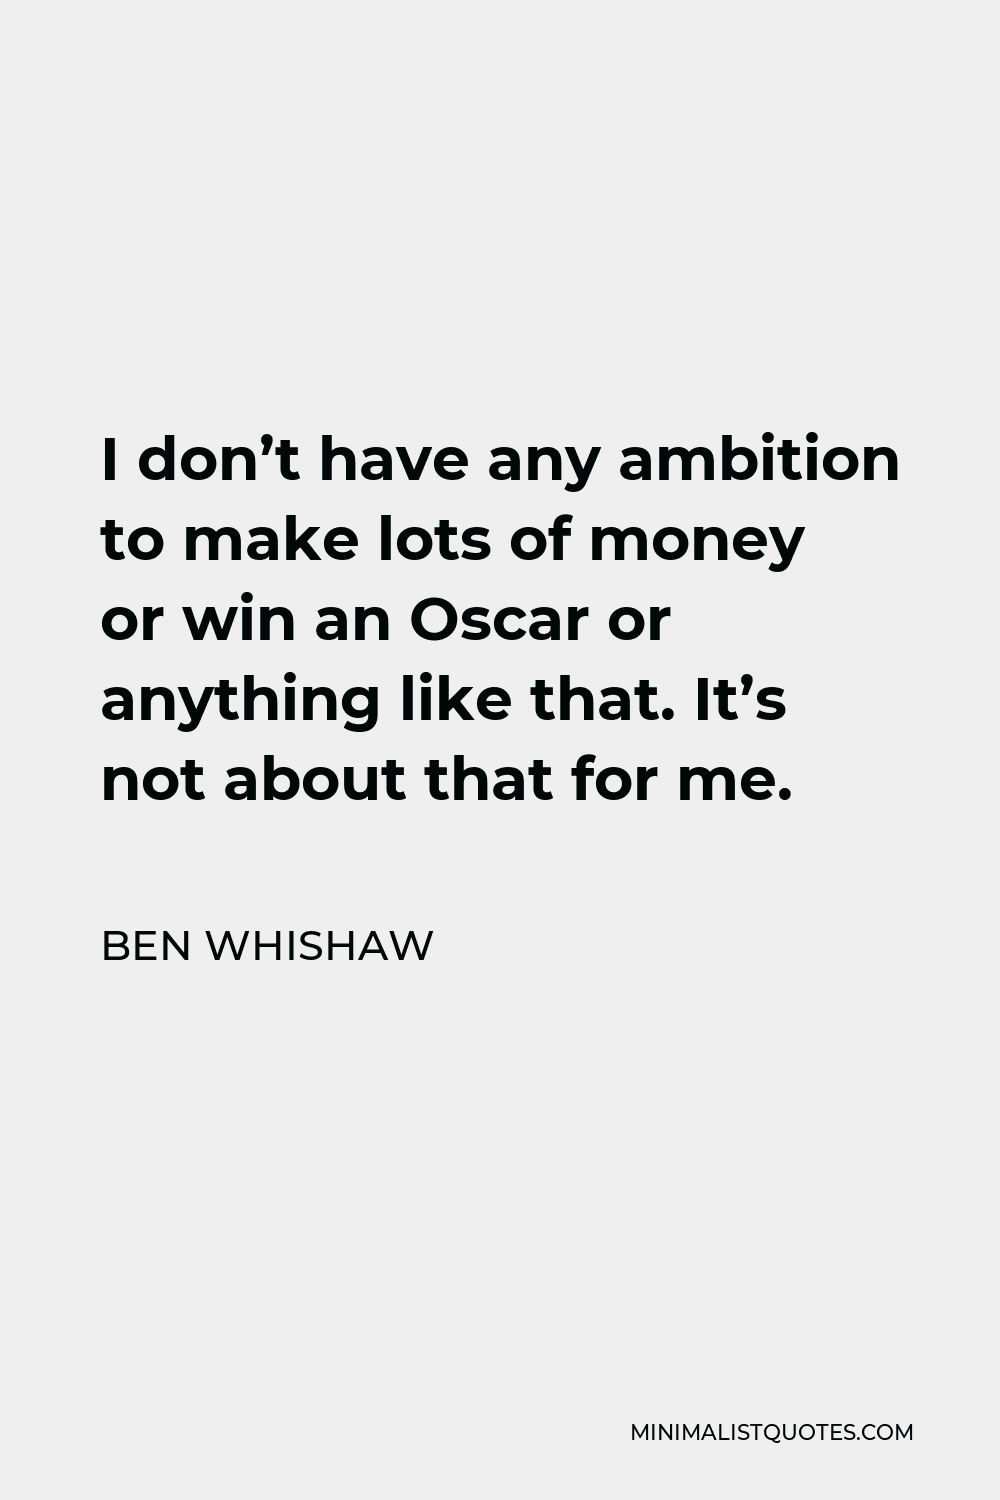 Ben Whishaw Quote - I don’t have any ambition to make lots of money or win an Oscar or anything like that. It’s not about that for me.